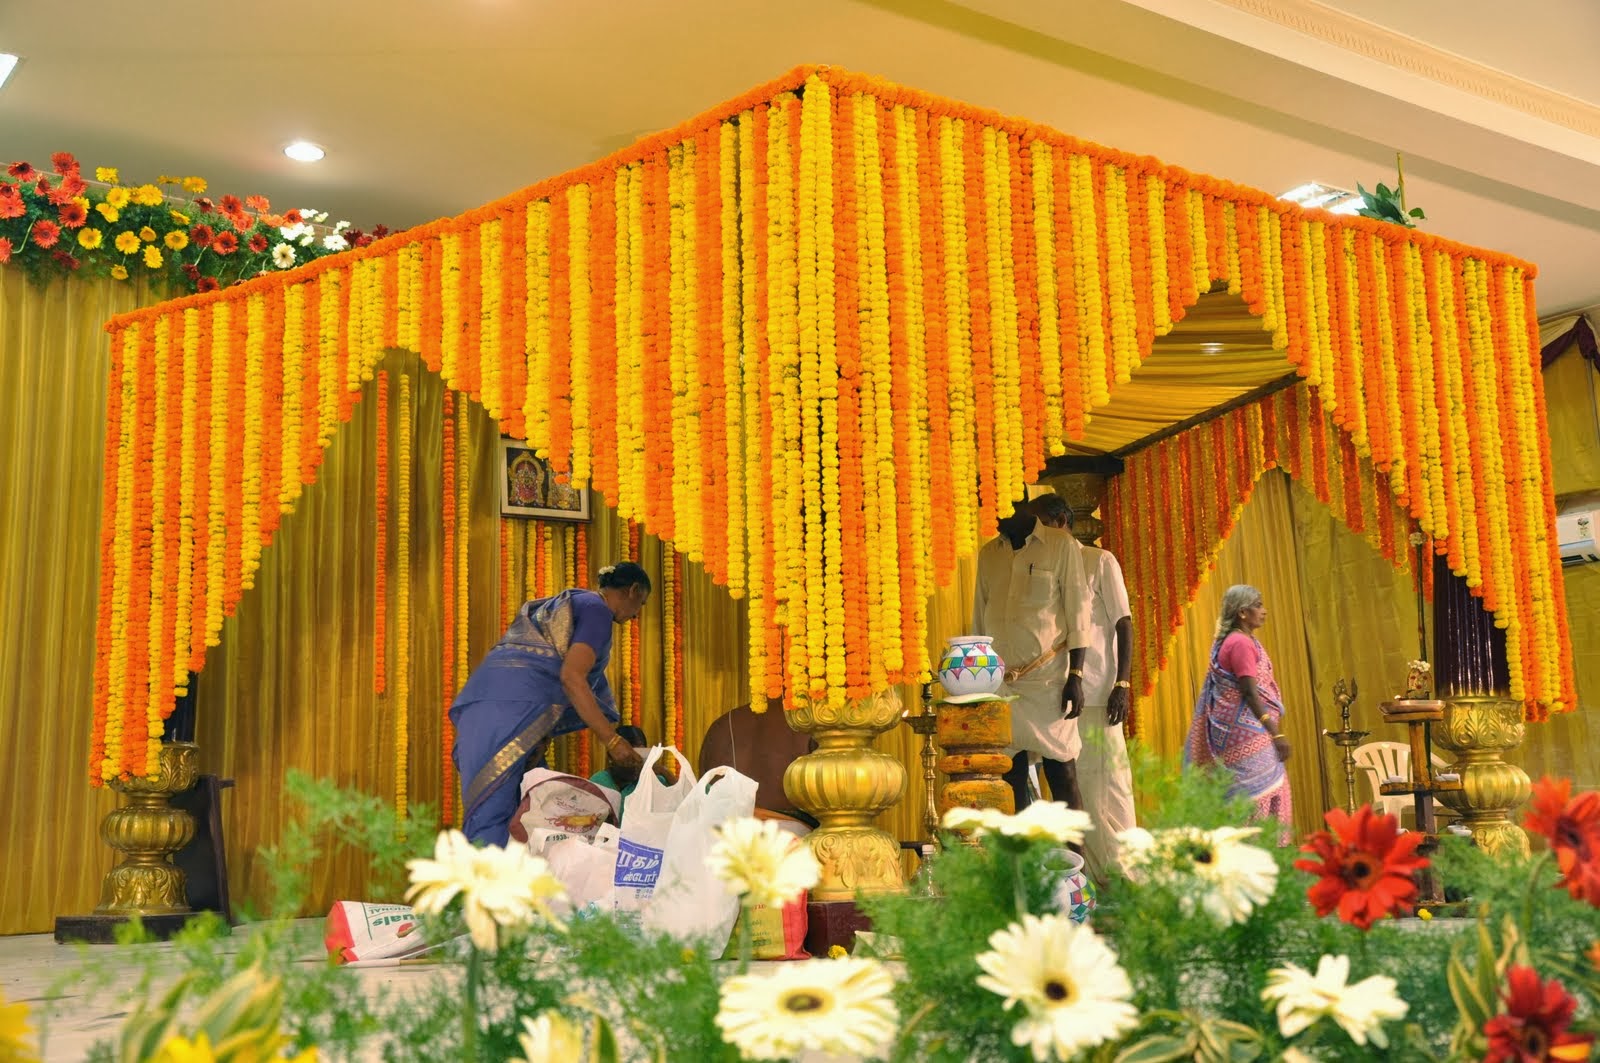  Indian  Weddings  16 Tips for Your Home  Decoration  